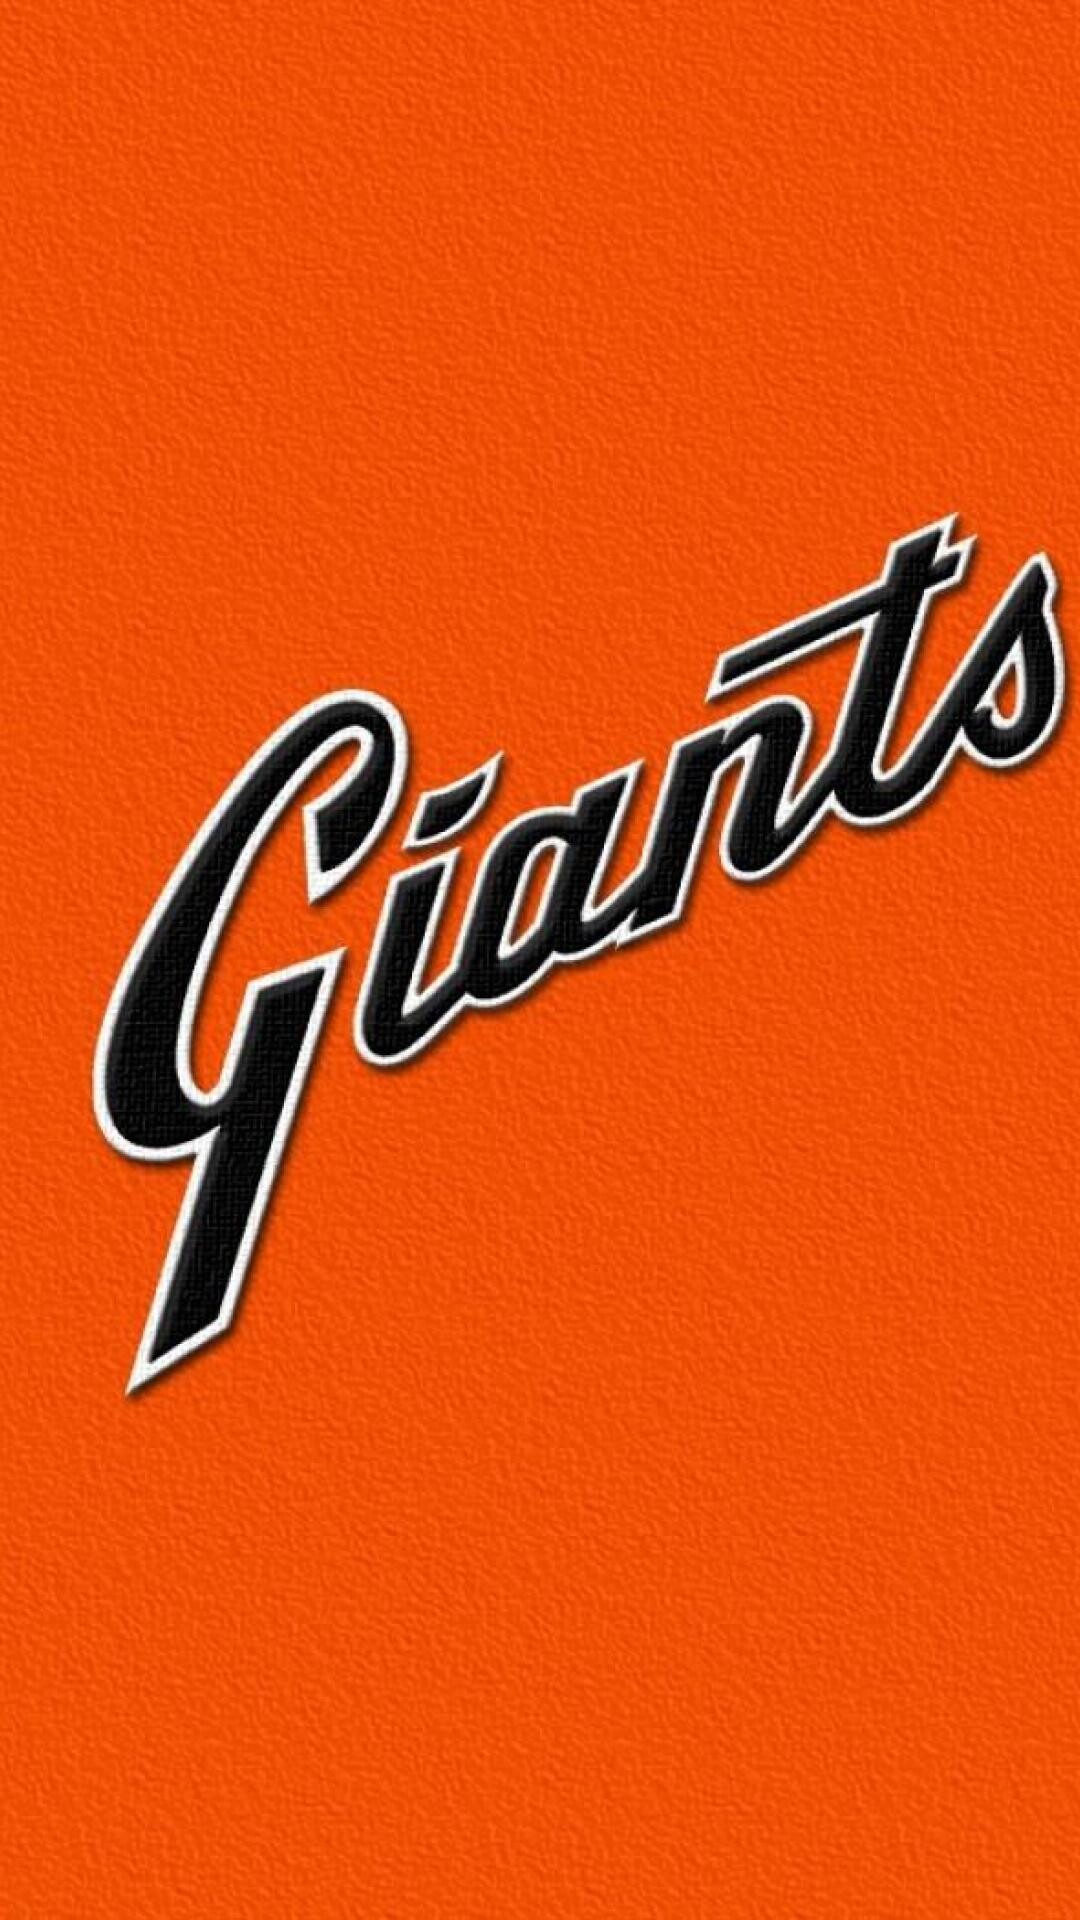 San Francisco Giants: The team won 83 games in 1986 and won the NL West Division title in 1987. 1080x1920 Full HD Background.